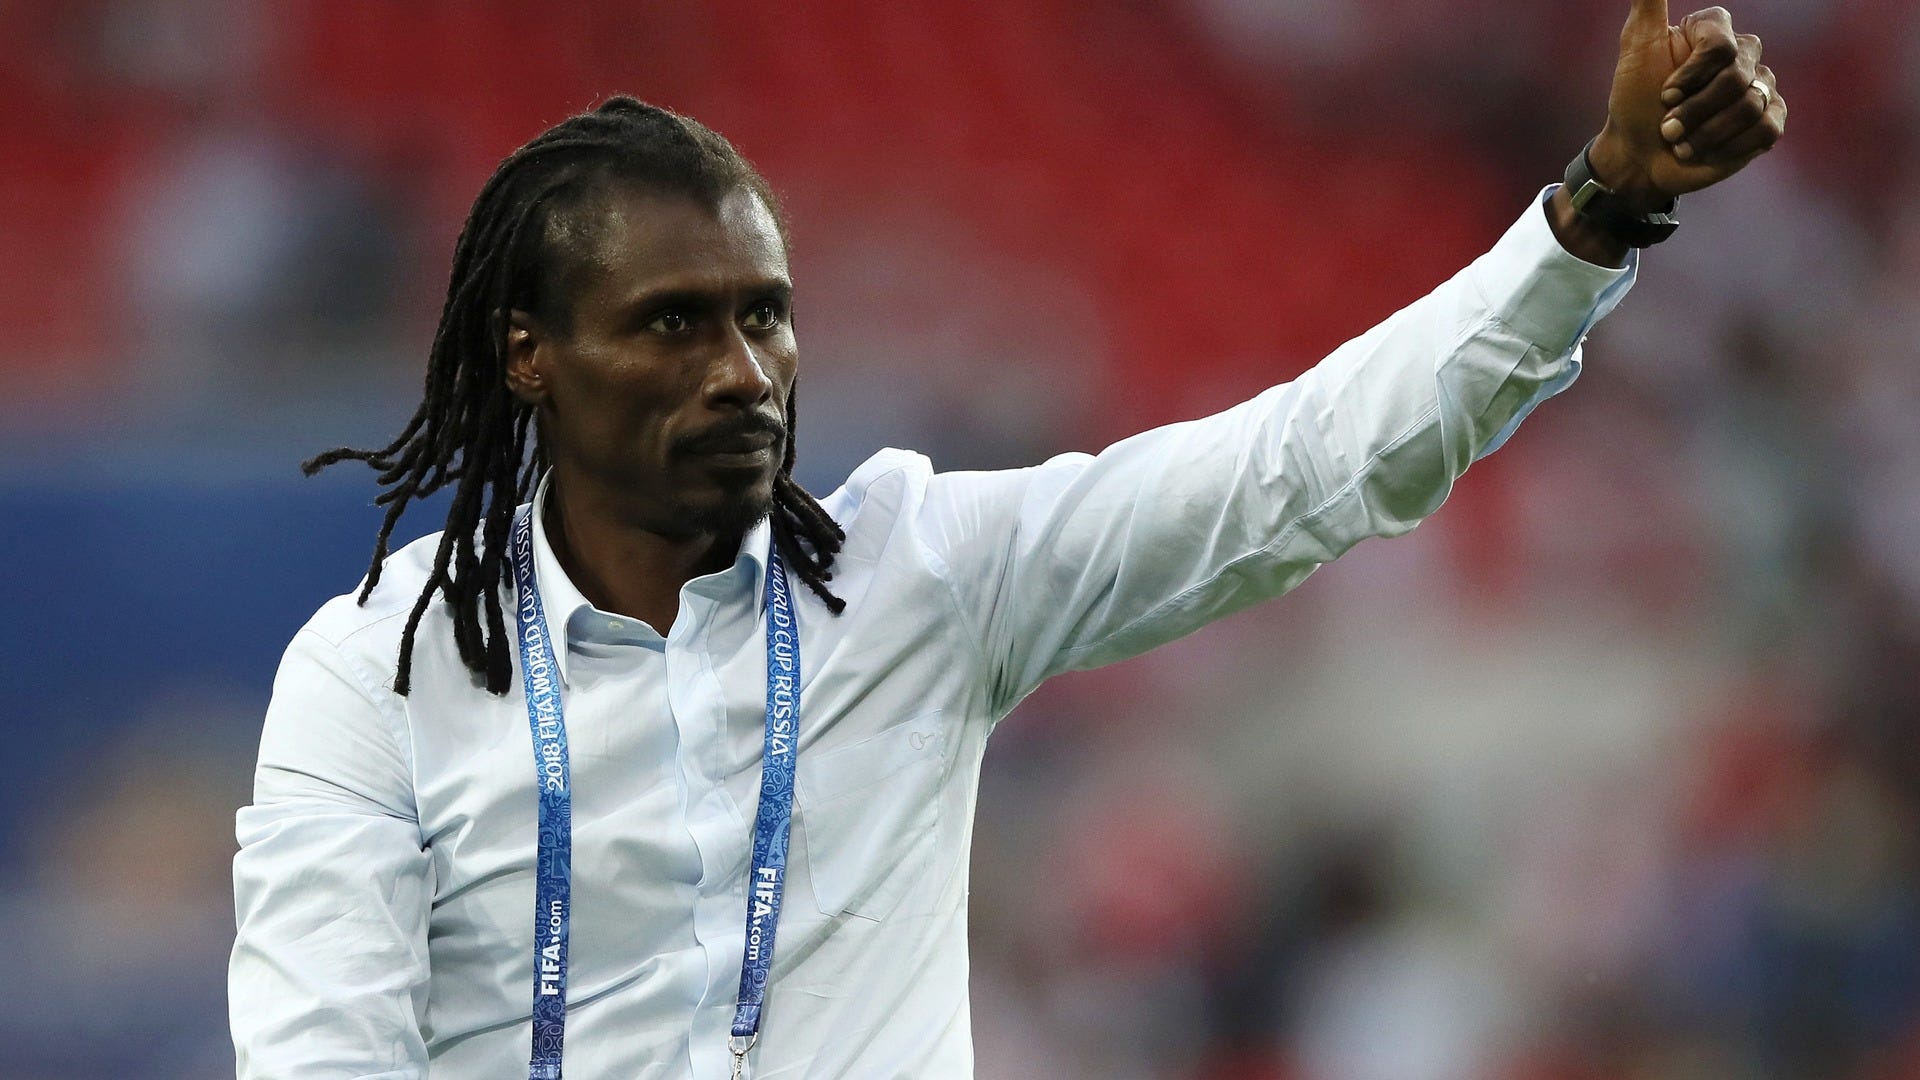 Afcon: Aliou Cisse - Senegal not favourites but we will fight to win | Goal.com India